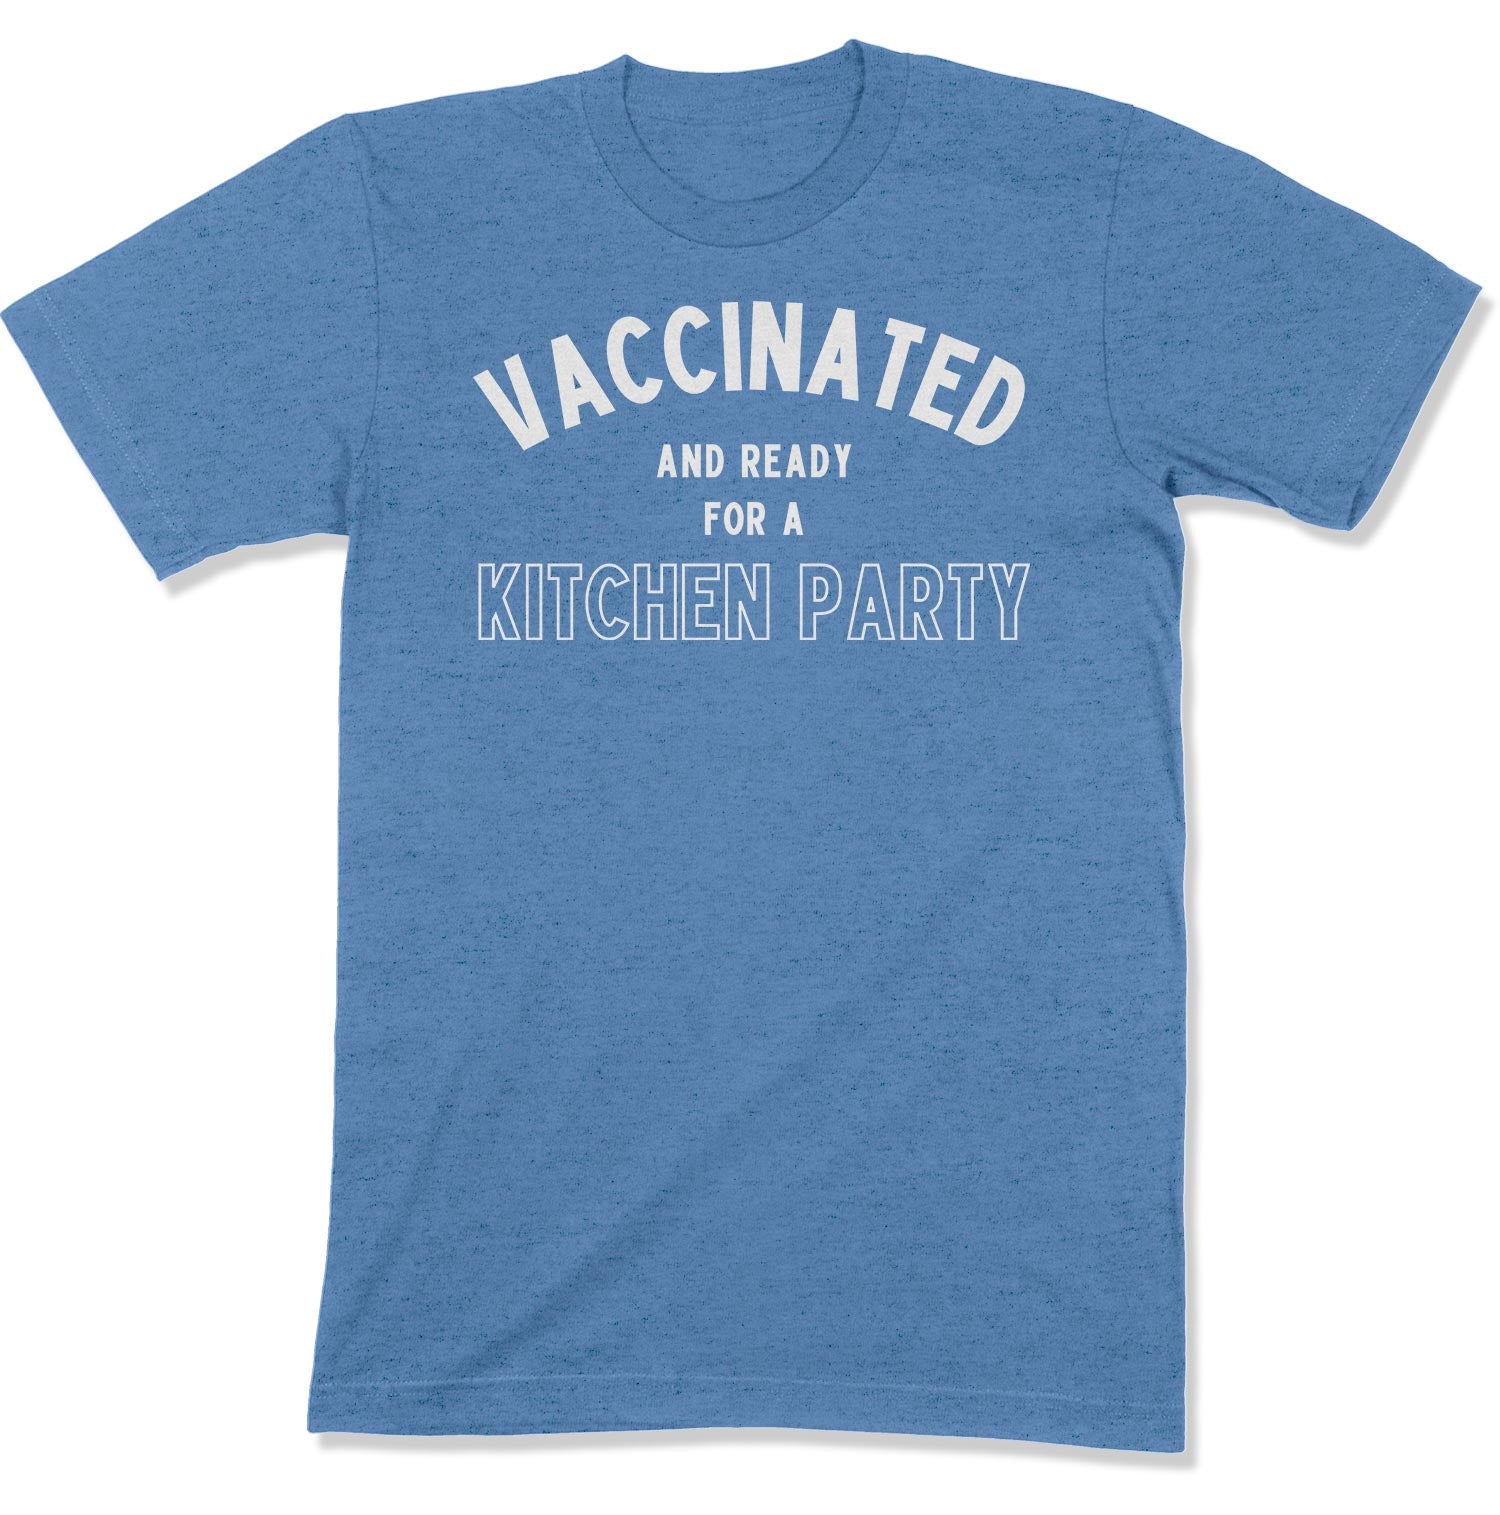 Vaccinated and Ready for a Kitchen Party Unisex T-Shirt-East Coast AF Apparel